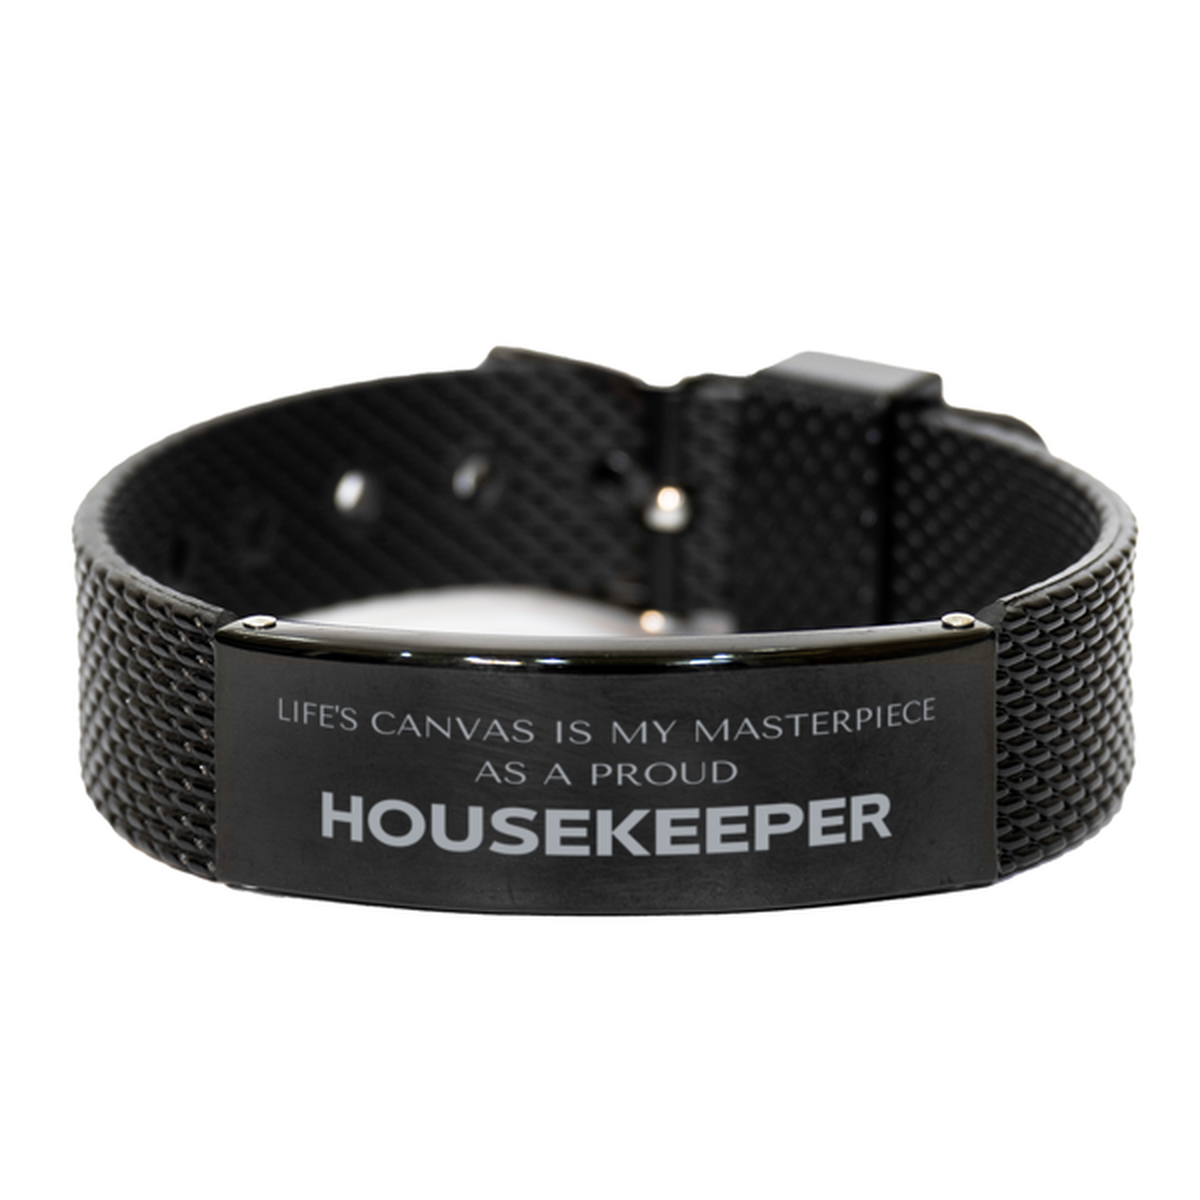 Proud Housekeeper Gifts, Life's canvas is my masterpiece, Epic Birthday Christmas Unique Black Shark Mesh Bracelet For Housekeeper, Coworkers, Men, Women, Friends